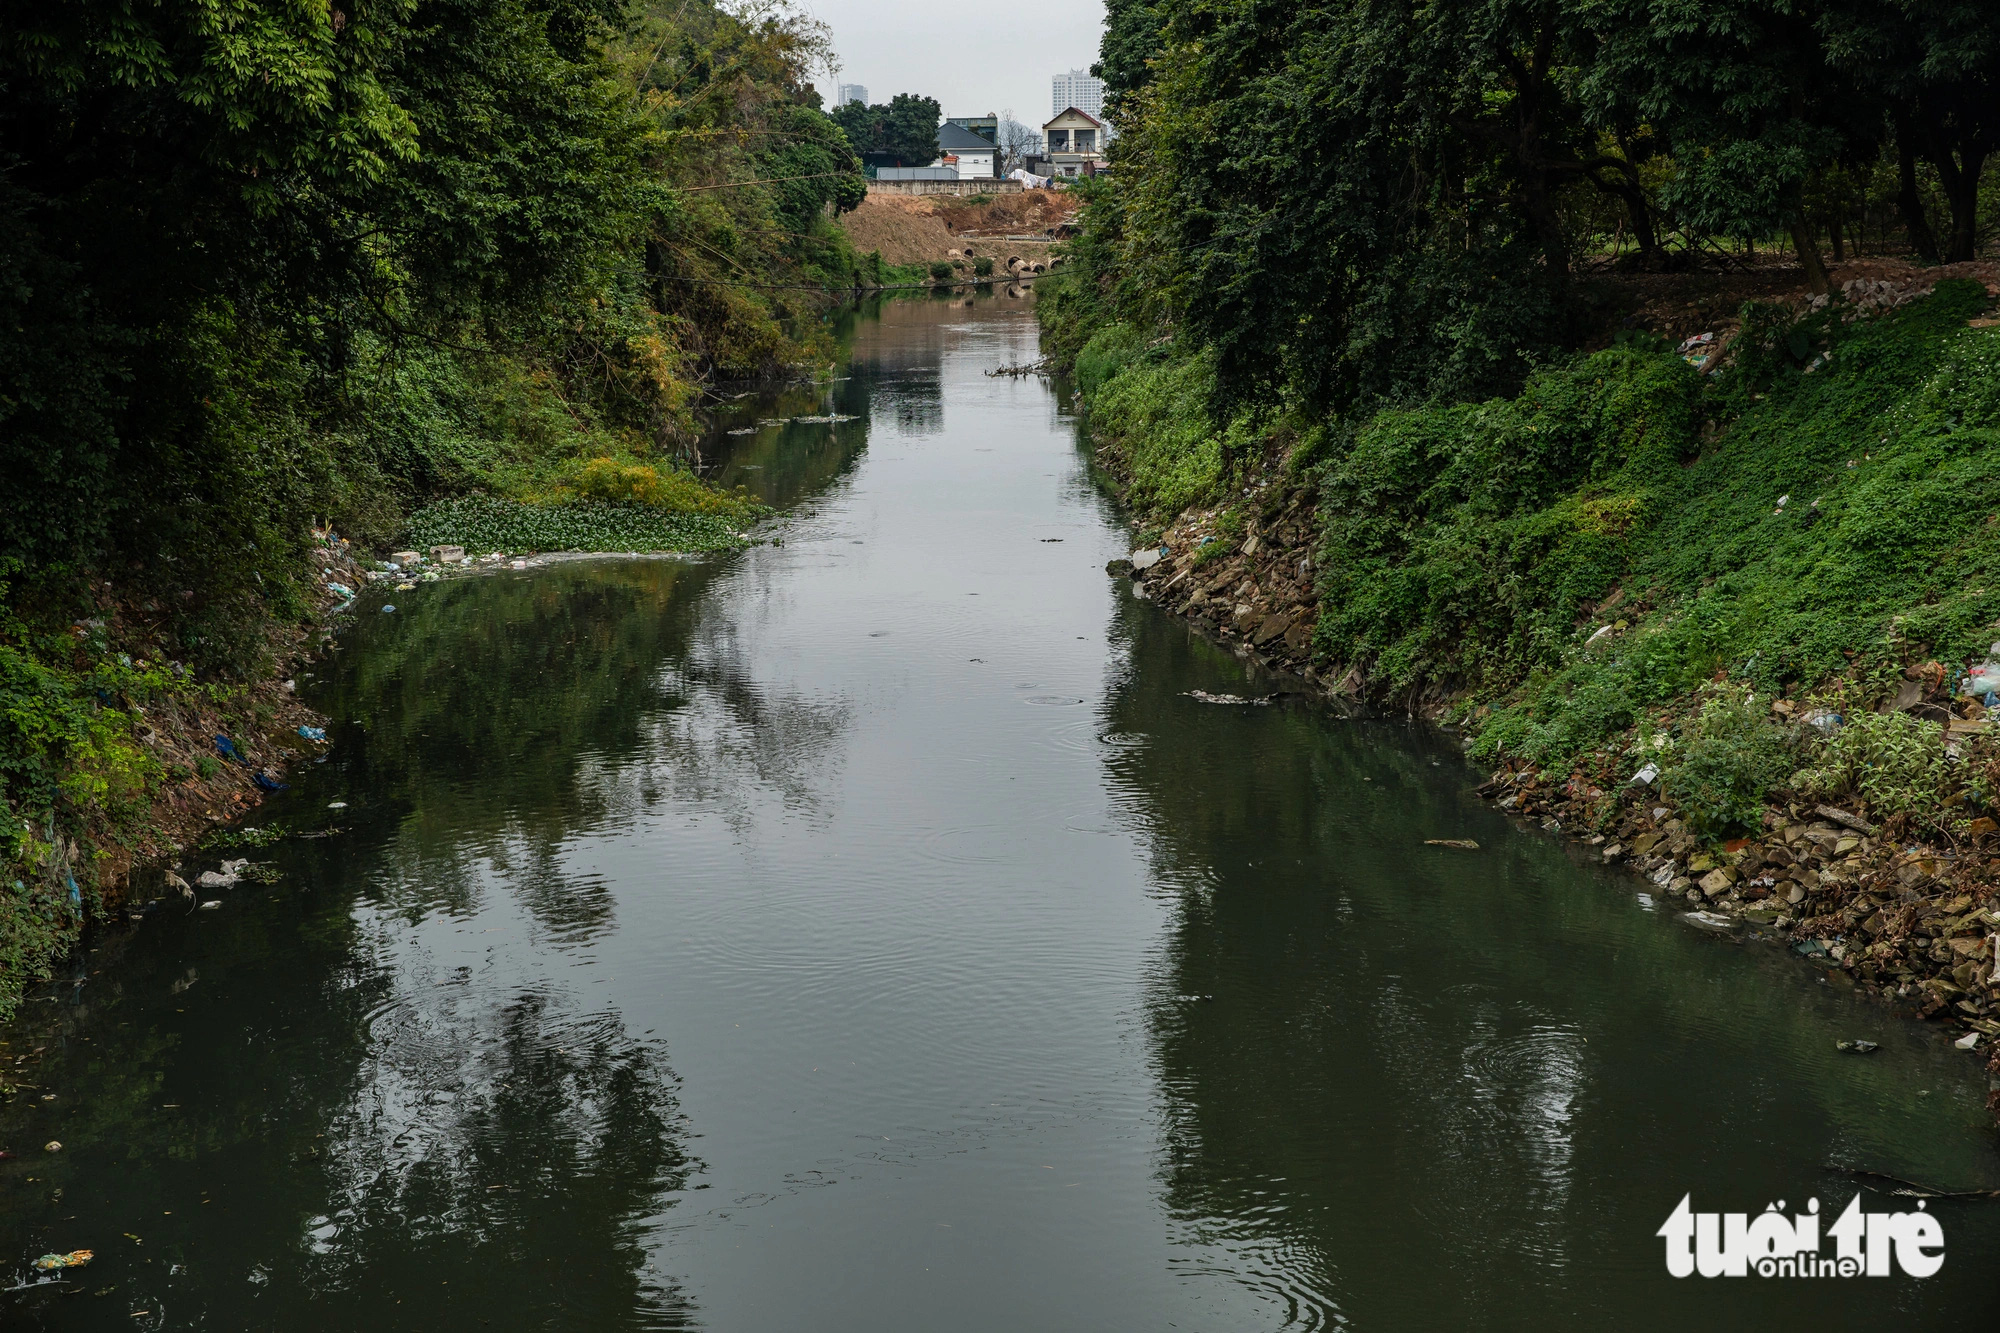 A wastewater channel in Hoa Long Ward of Bac Ninh City in Bac Ninh Province, northern Vietnam empties directly into the Cau River. Photo: D.Khang / Tuoi Tre